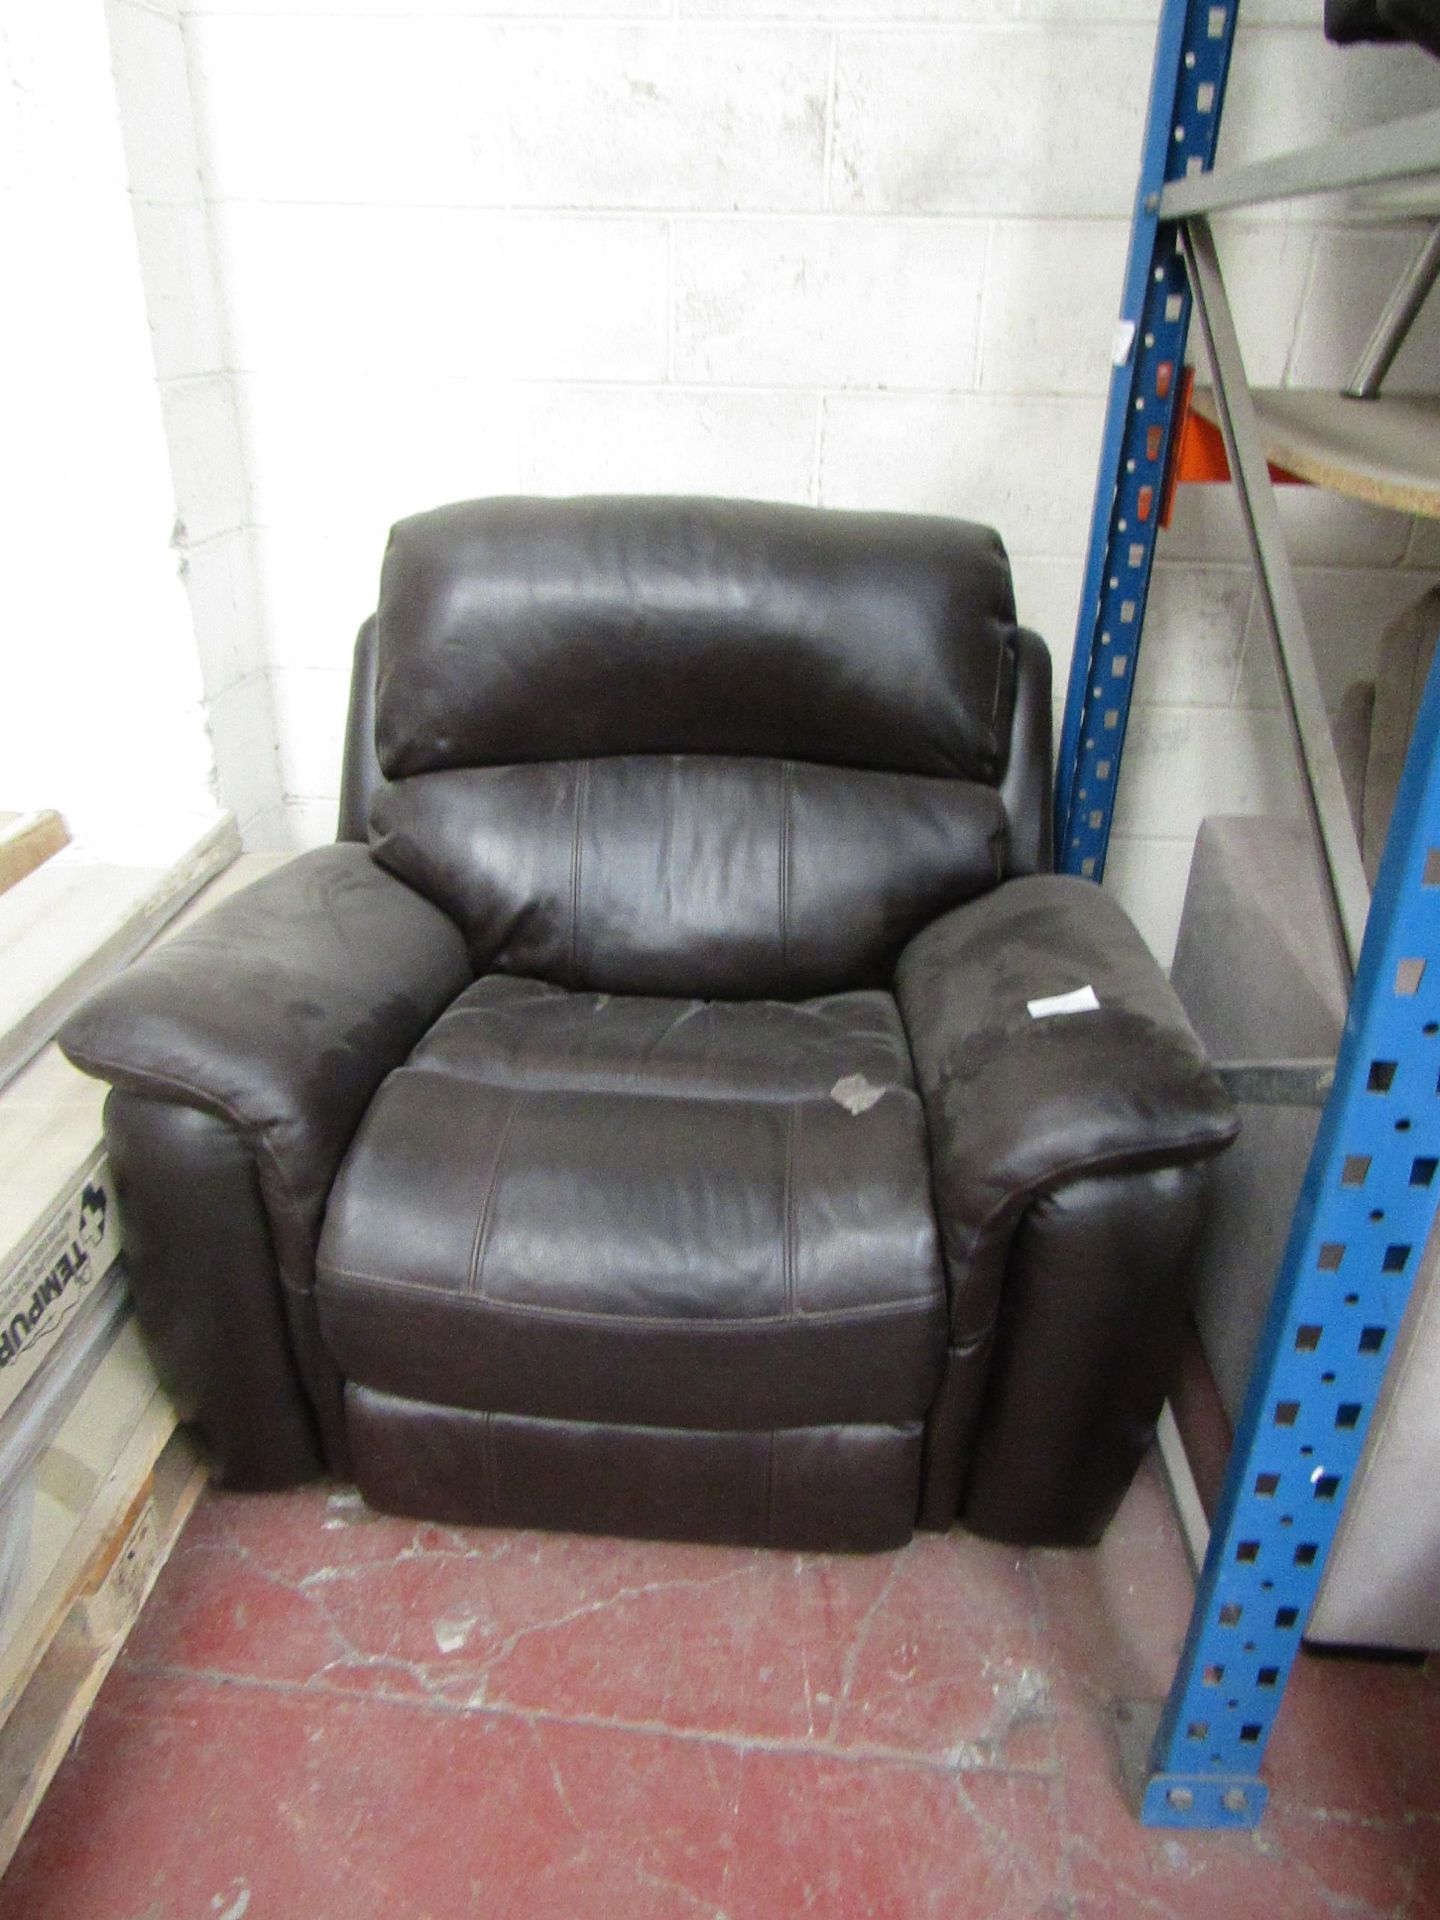 Polaski Brown leather Manual reclining Armchair, no major damage and mechanism fully works